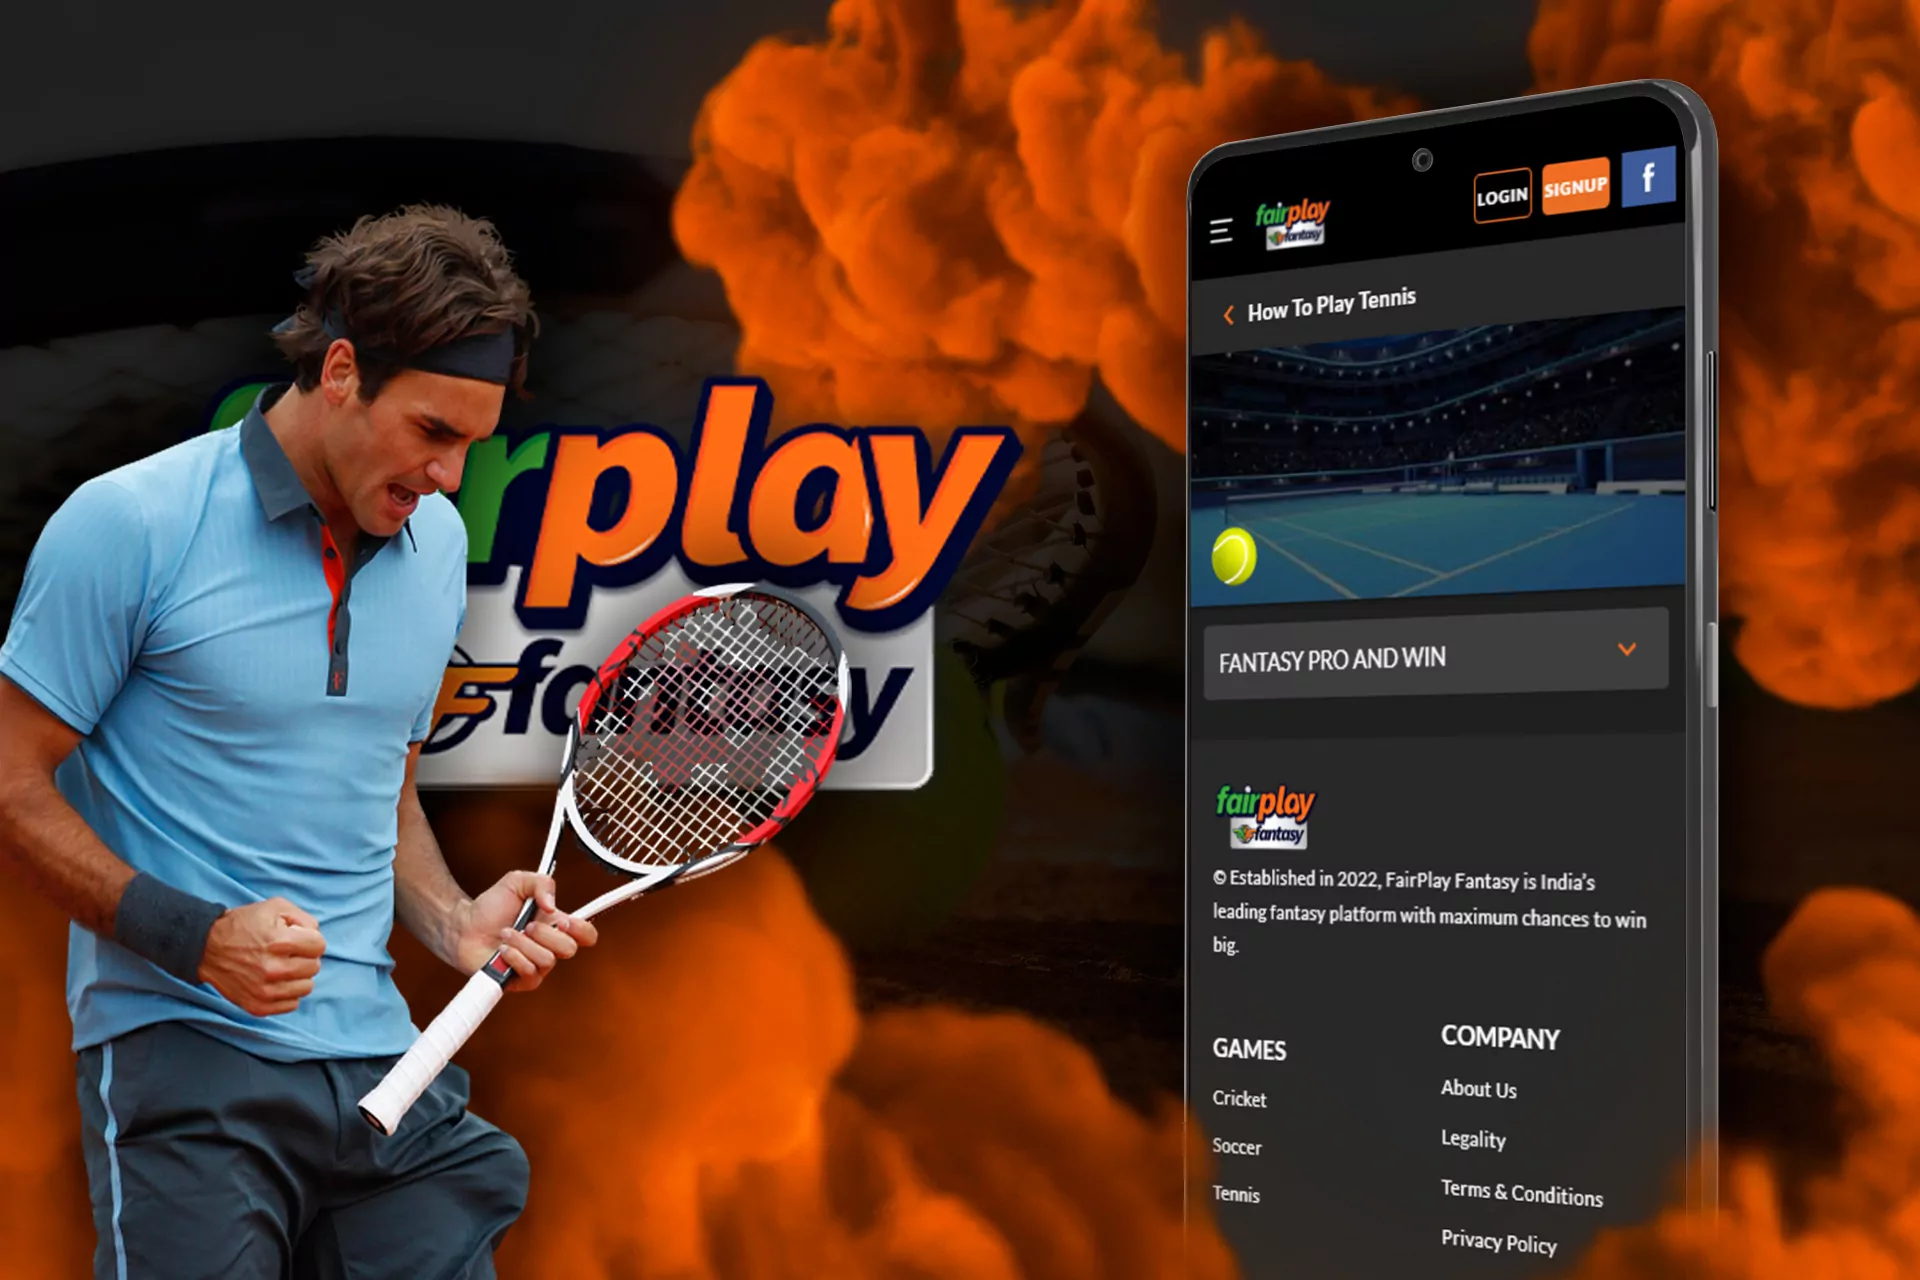 You can bet on fantasy tennis matches as well on Fairplay.